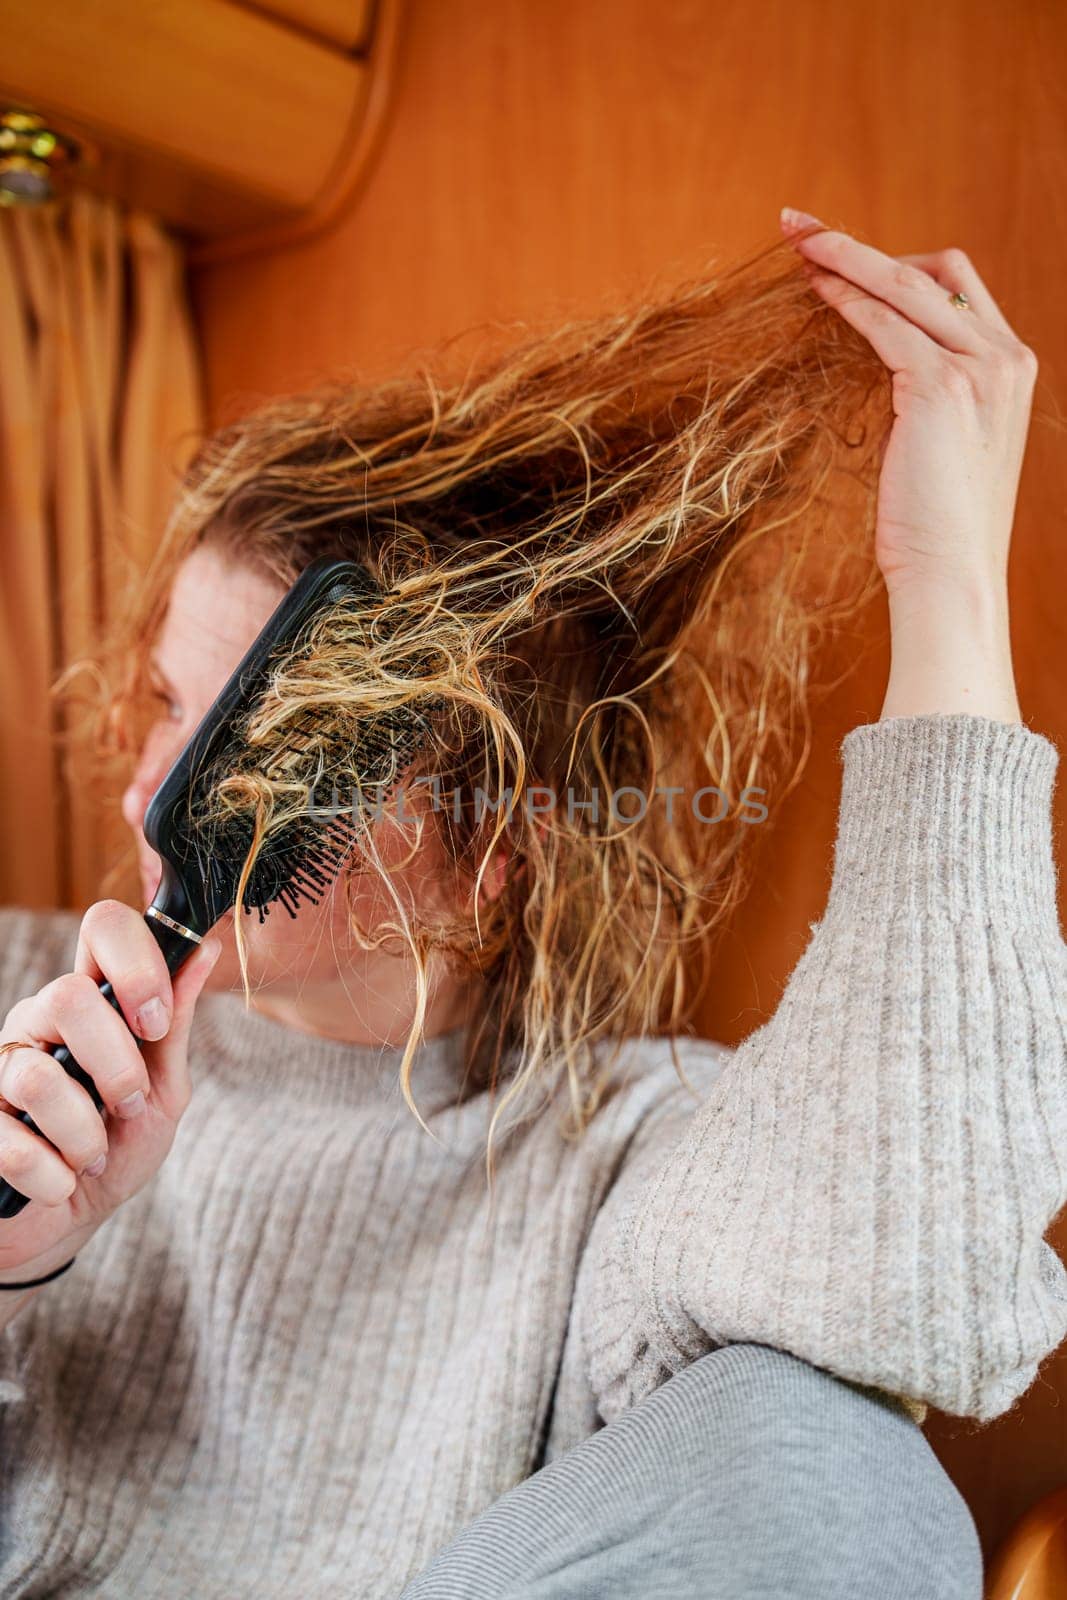 Young Girl Combing Extremely Tangled Hair with Patience and Care by PhotoTime